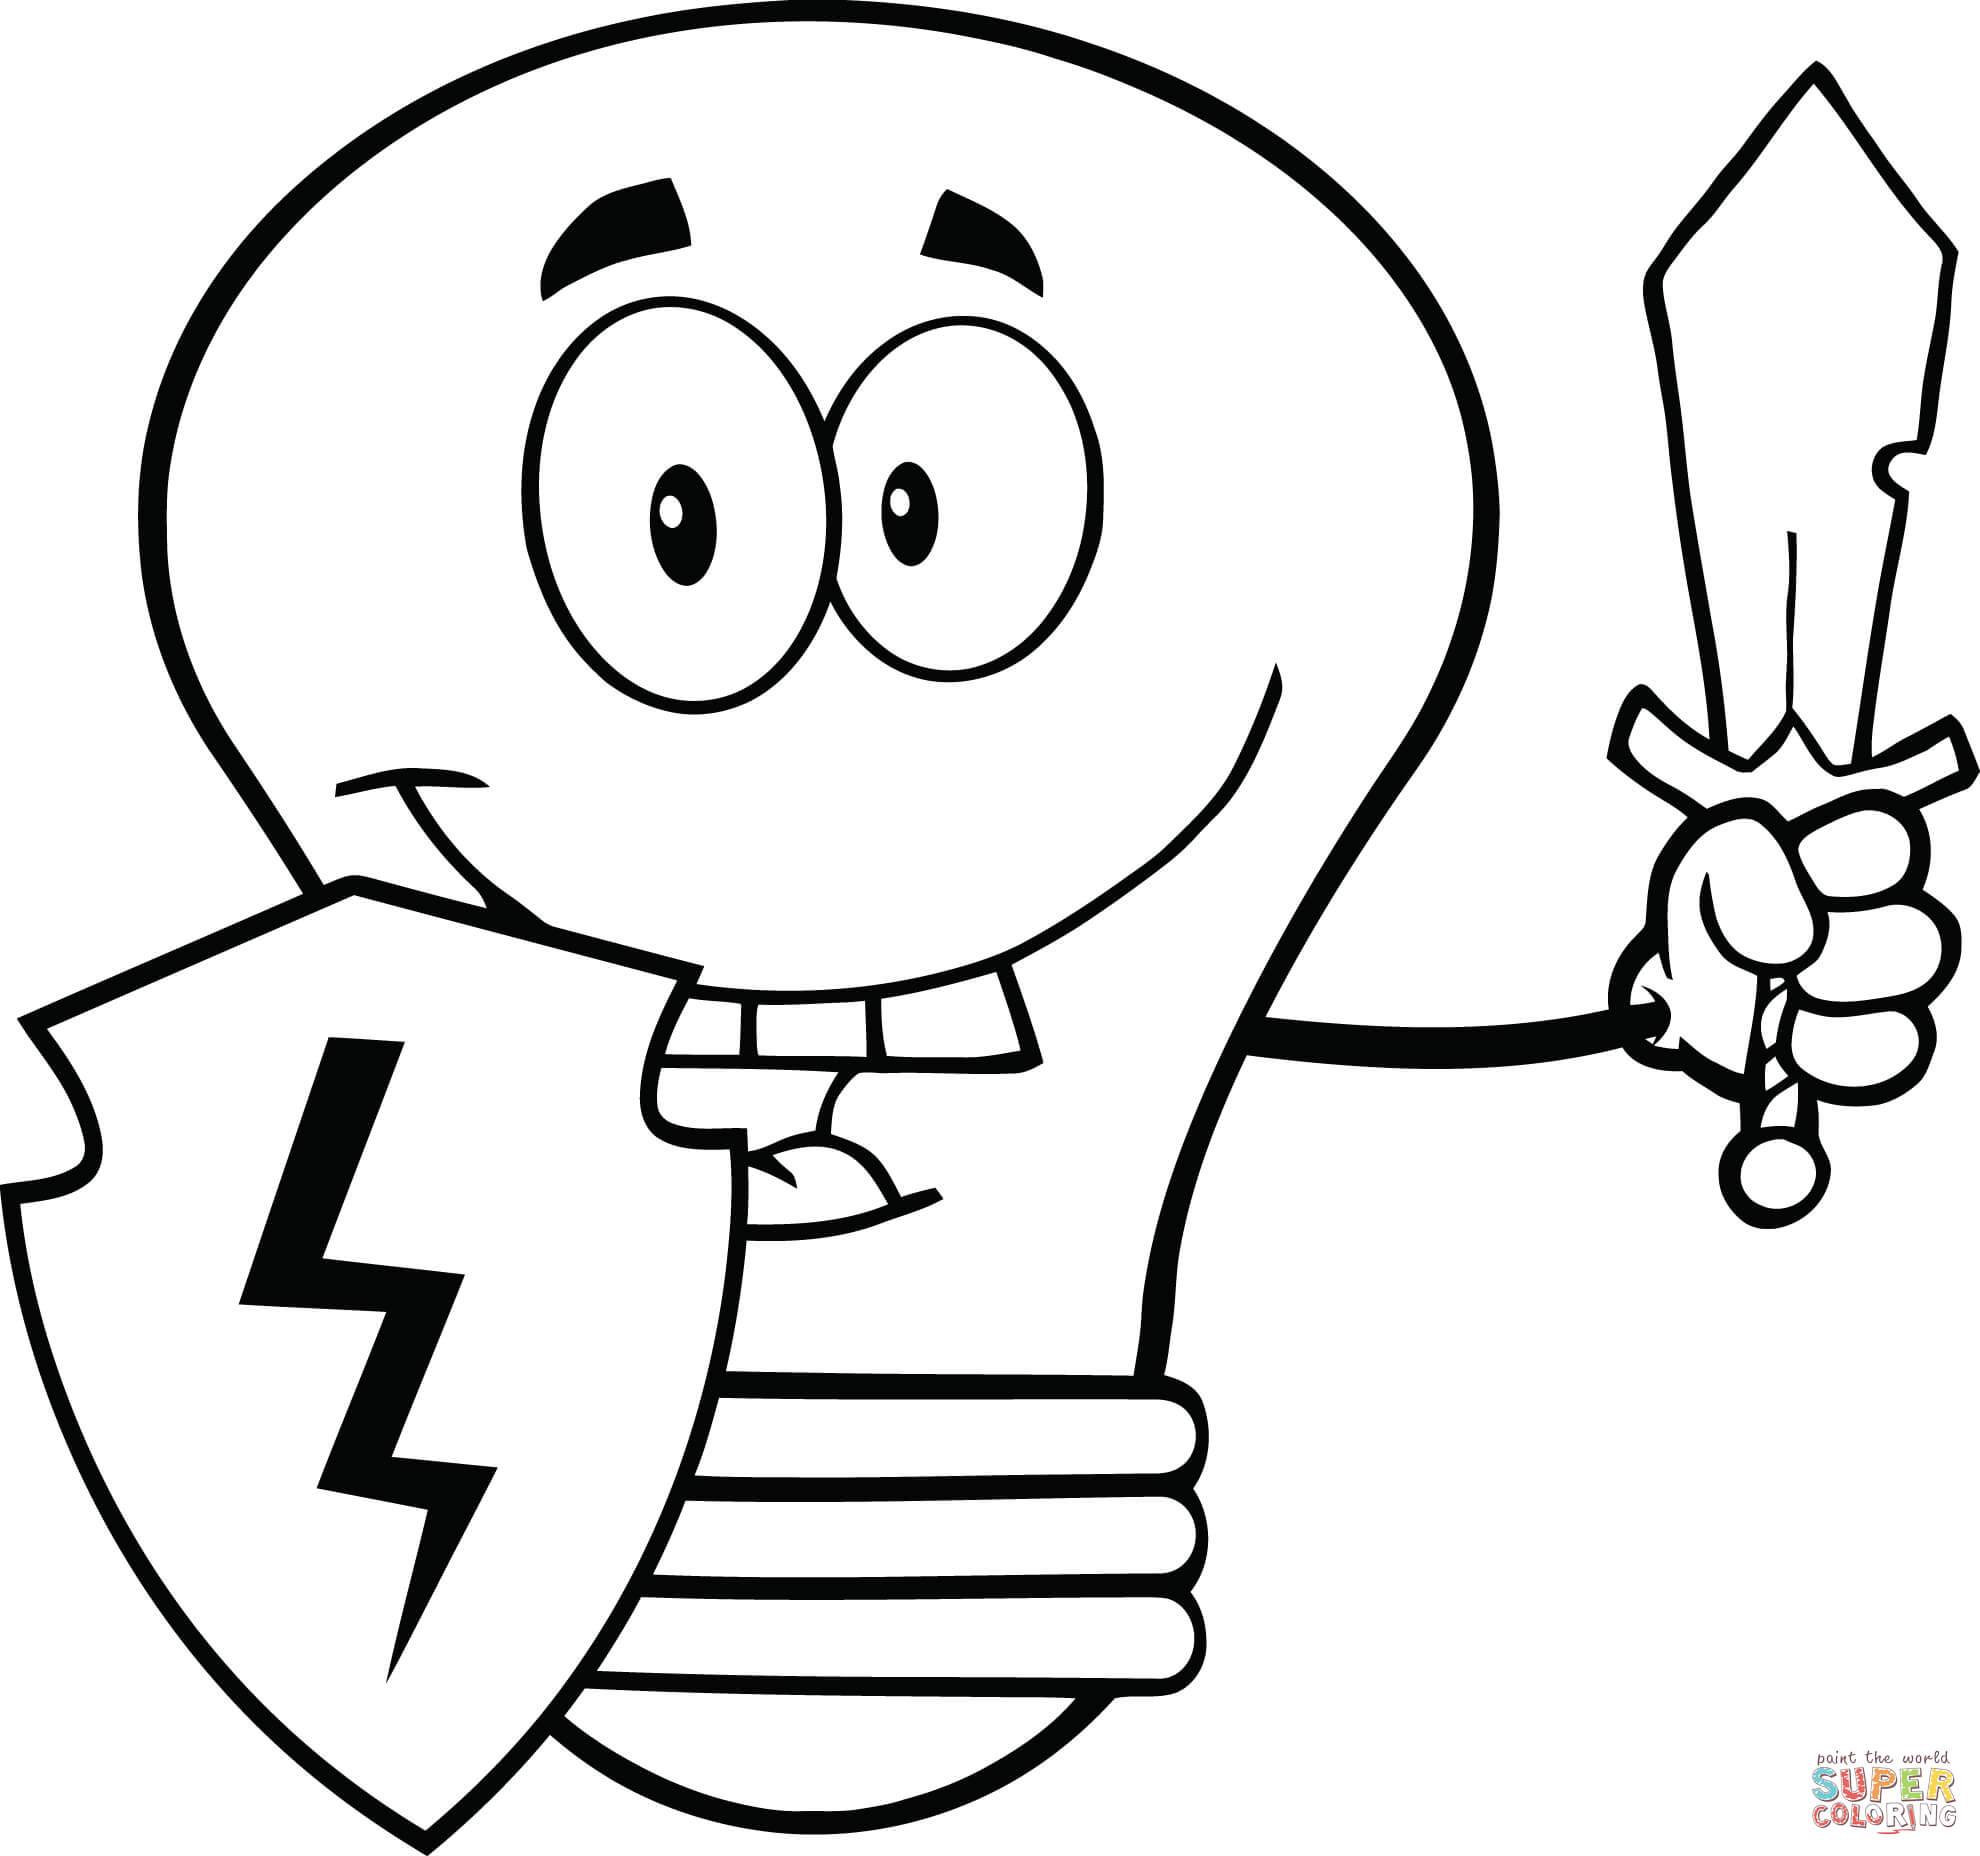 Light Bulb coloring page | Free Printable Coloring Pages